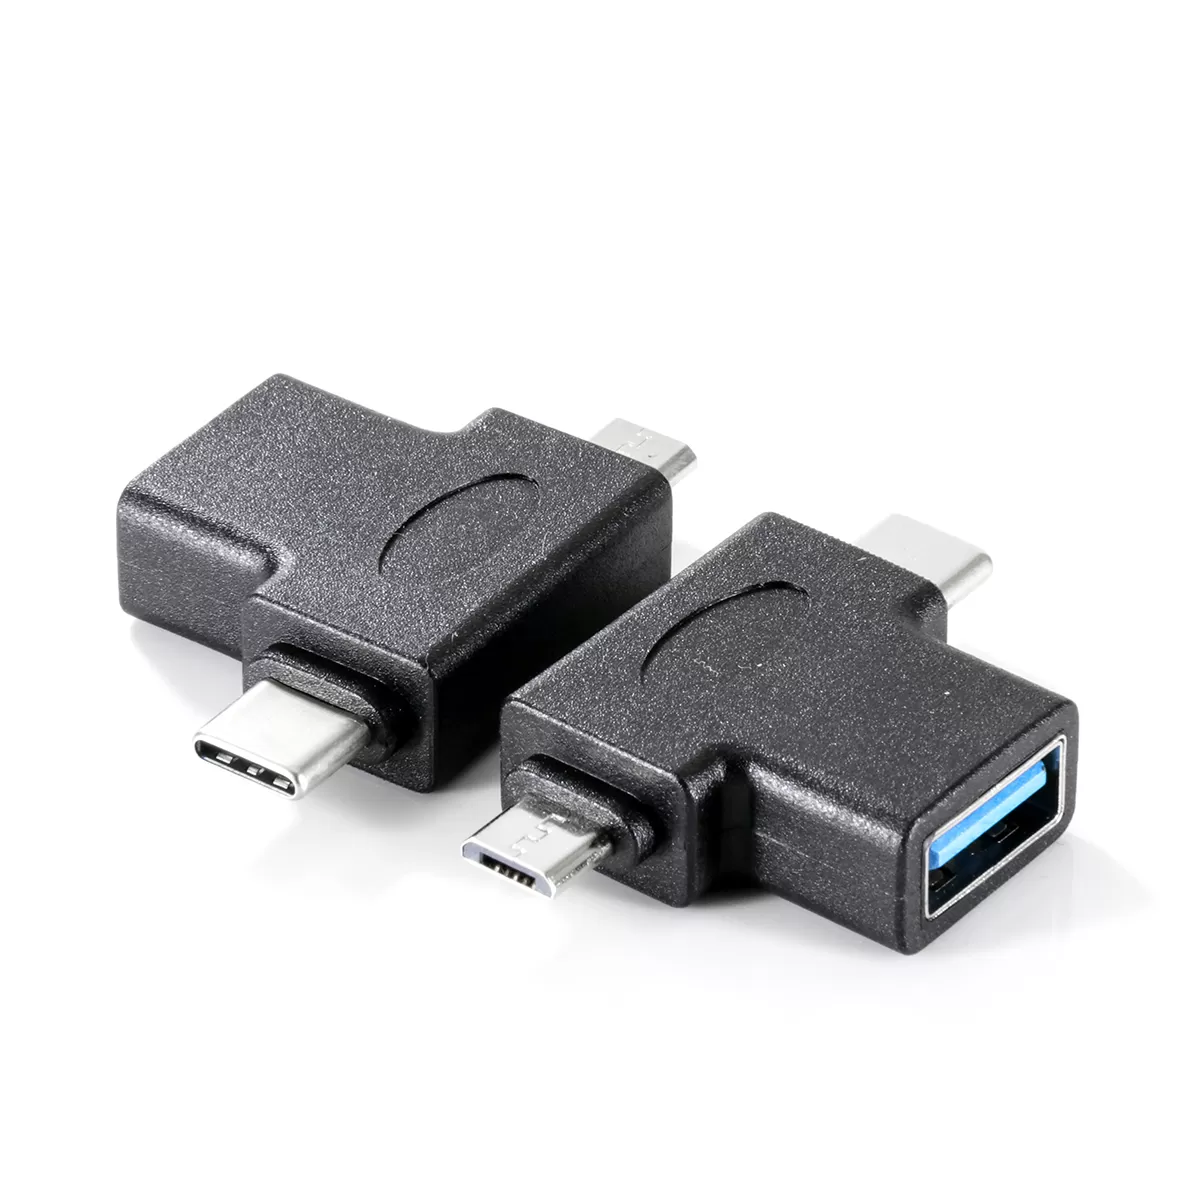 2 in1 Micro USB 3.0 and 2.0 Type C OTG Adapter